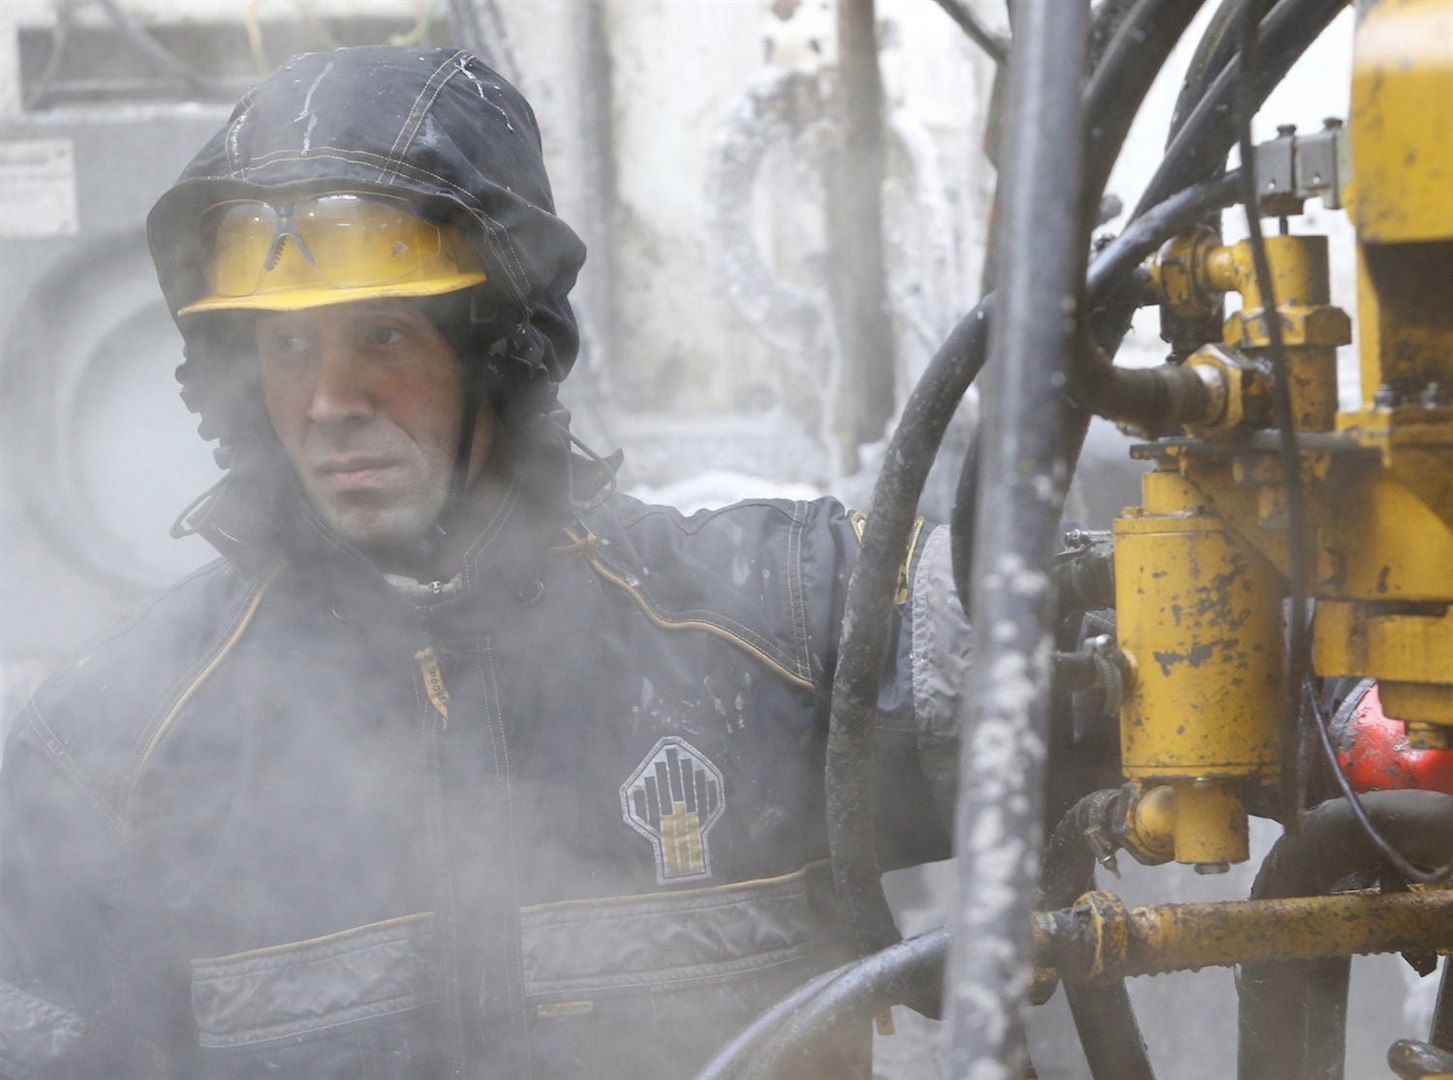 An employee works at a drilling site at the Rosneft company-owned Suzunskoye oil field, north of the Russian Siberian city of Krasnoyarsk, on March 26, 2015. REUTERS/Sergei Karpukhin